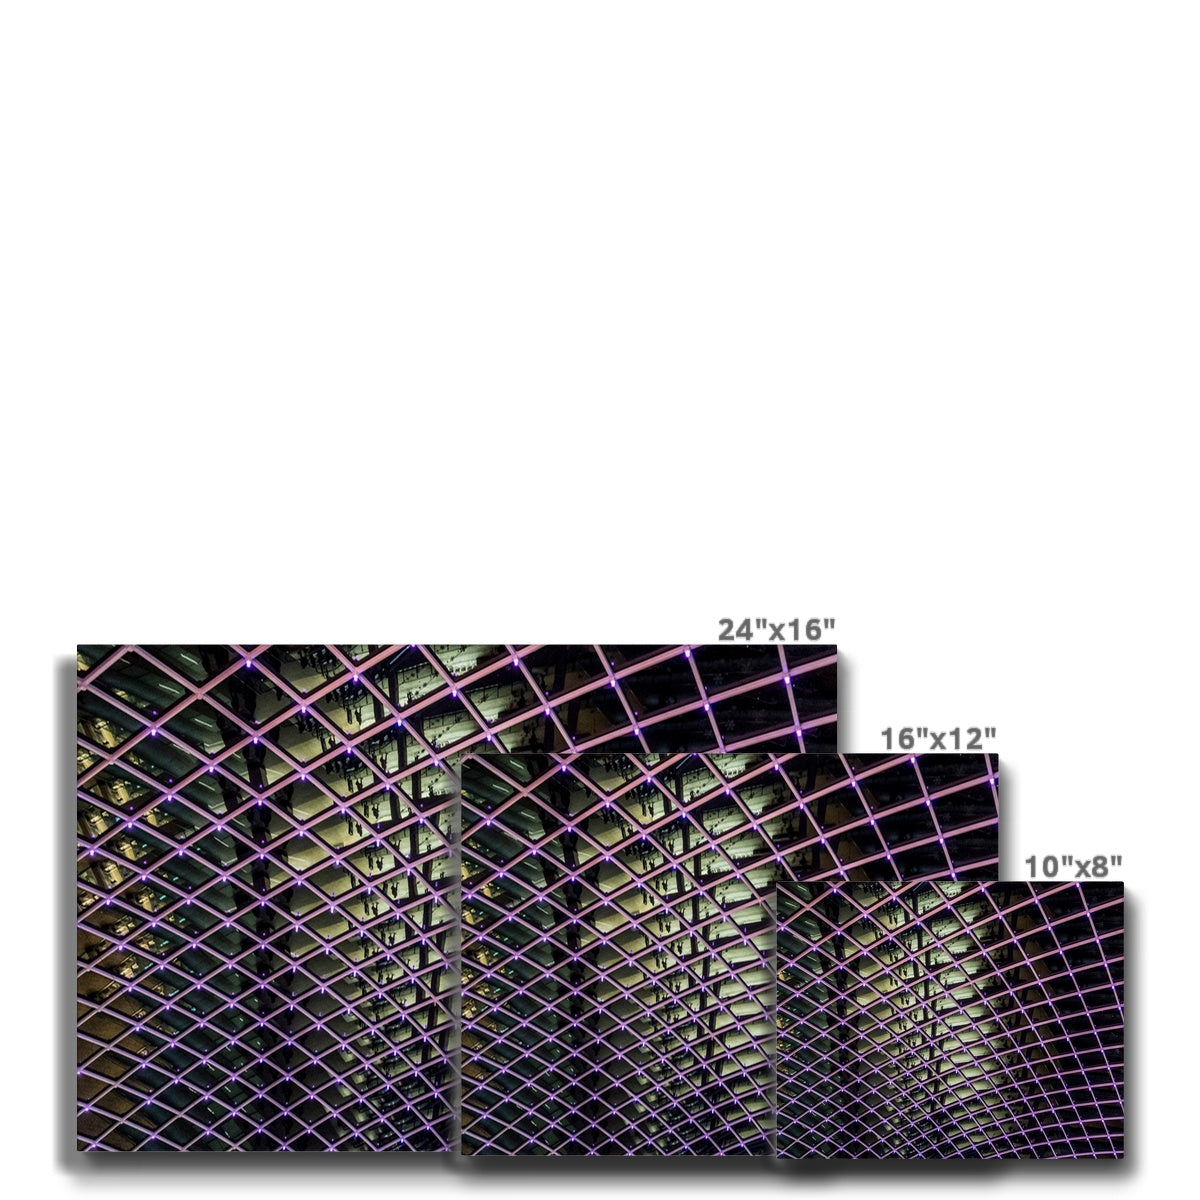 Illuminated grid pattern on a glass ceiling captured at night Canvas